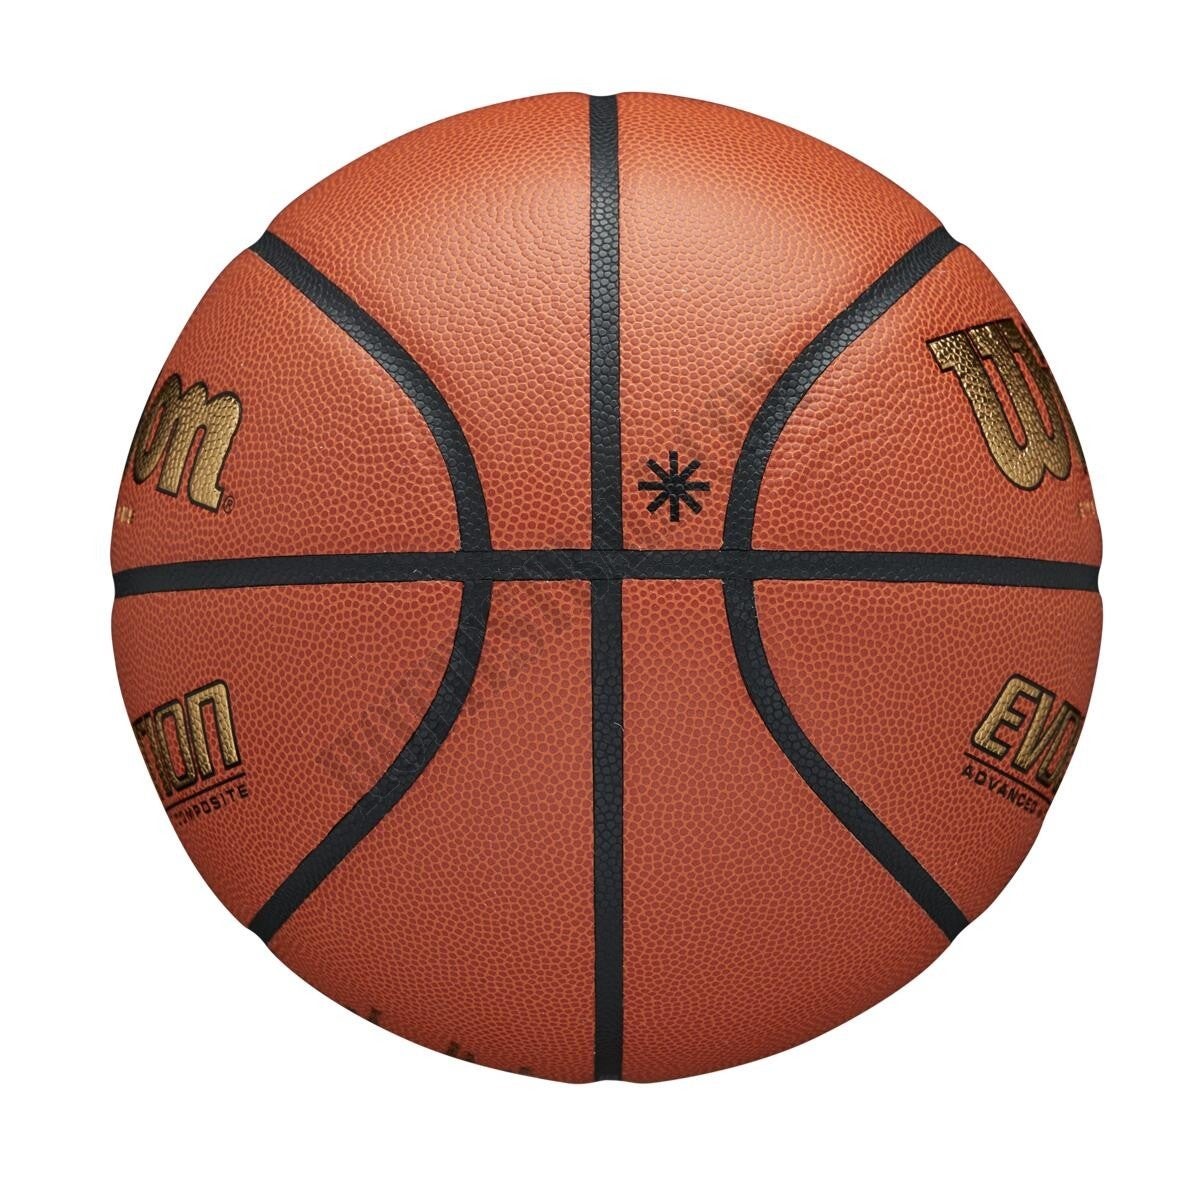 Evo Editions Gold Basketball - Wilson Discount Store - -5